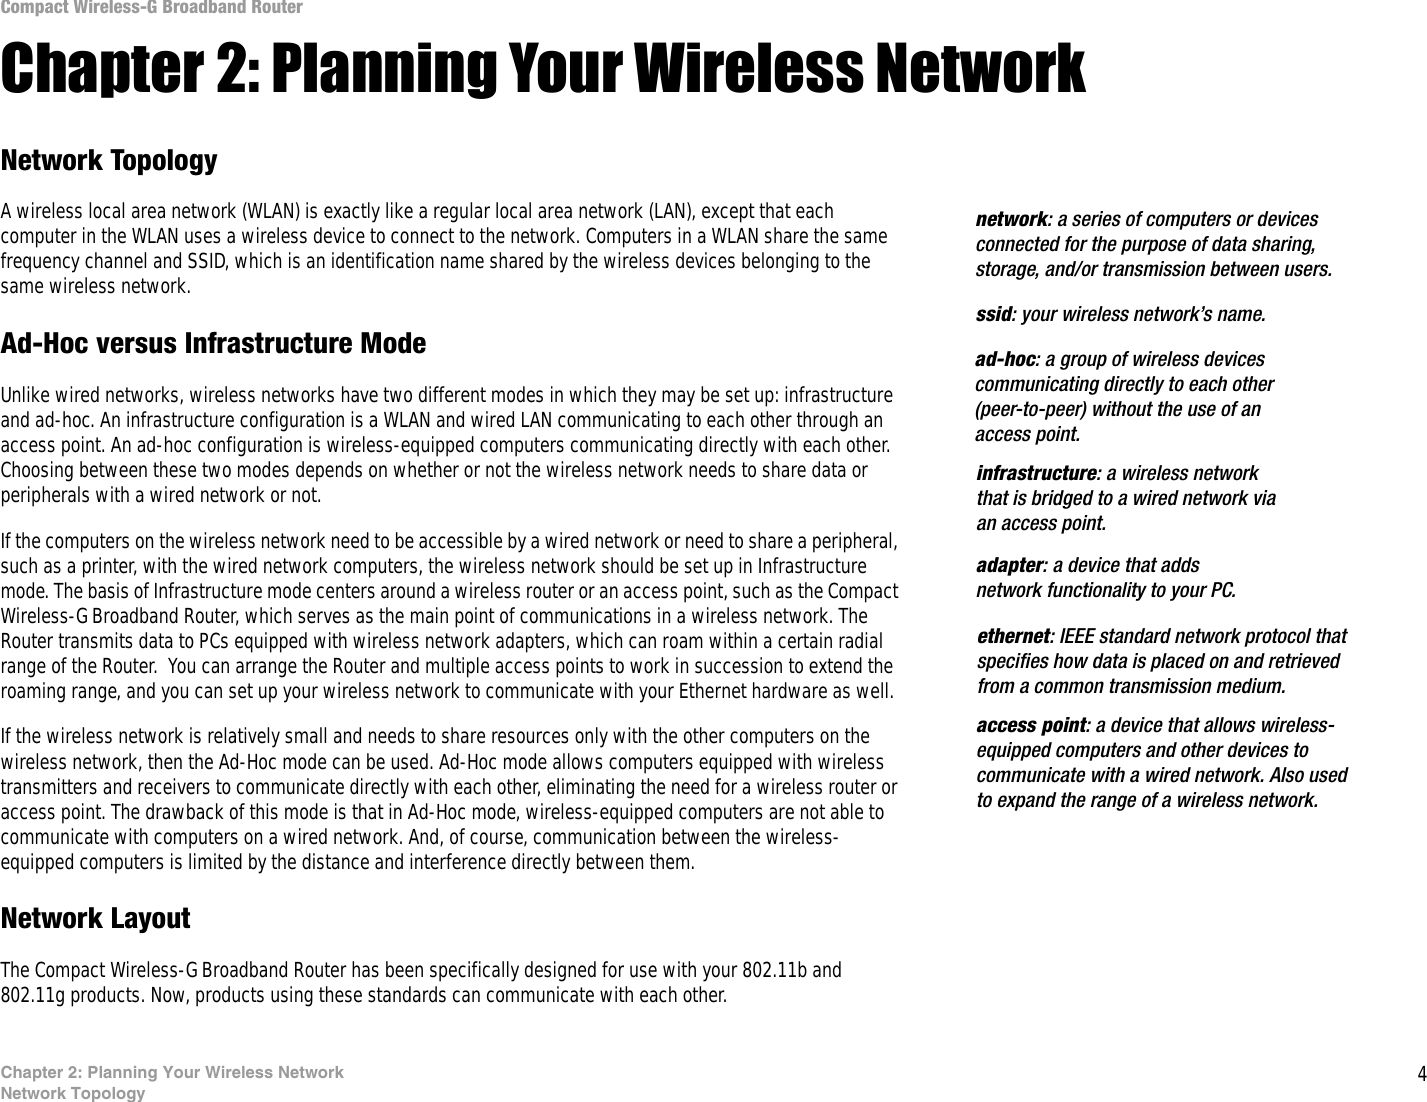 4Chapter 2: Planning Your Wireless NetworkNetwork TopologyCompact Wireless-G Broadband RouterChapter 2: Planning Your Wireless NetworkNetwork TopologyA wireless local area network (WLAN) is exactly like a regular local area network (LAN), except that each computer in the WLAN uses a wireless device to connect to the network. Computers in a WLAN share the same frequency channel and SSID, which is an identification name shared by the wireless devices belonging to the same wireless network.Ad-Hoc versus Infrastructure ModeUnlike wired networks, wireless networks have two different modes in which they may be set up: infrastructure and ad-hoc. An infrastructure configuration is a WLAN and wired LAN communicating to each other through an access point. An ad-hoc configuration is wireless-equipped computers communicating directly with each other. Choosing between these two modes depends on whether or not the wireless network needs to share data or peripherals with a wired network or not. If the computers on the wireless network need to be accessible by a wired network or need to share a peripheral, such as a printer, with the wired network computers, the wireless network should be set up in Infrastructure mode. The basis of Infrastructure mode centers around a wireless router or an access point, such as the Compact Wireless-G Broadband Router, which serves as the main point of communications in a wireless network. The Router transmits data to PCs equipped with wireless network adapters, which can roam within a certain radial range of the Router.  You can arrange the Router and multiple access points to work in succession to extend the roaming range, and you can set up your wireless network to communicate with your Ethernet hardware as well. If the wireless network is relatively small and needs to share resources only with the other computers on the wireless network, then the Ad-Hoc mode can be used. Ad-Hoc mode allows computers equipped with wireless transmitters and receivers to communicate directly with each other, eliminating the need for a wireless router or access point. The drawback of this mode is that in Ad-Hoc mode, wireless-equipped computers are not able to communicate with computers on a wired network. And, of course, communication between the wireless-equipped computers is limited by the distance and interference directly between them. Network LayoutThe Compact Wireless-G Broadband Router has been specifically designed for use with your 802.11b and 802.11g products. Now, products using these standards can communicate with each other.infrastructure: a wireless network that is bridged to a wired network via an access point.ssid: your wireless network’s name.ad-hoc: a group of wireless devices communicating directly to each other (peer-to-peer) without the use of an access point.access point: a device that allows wireless-equipped computers and other devices to communicate with a wired network. Also used to expand the range of a wireless network.adapter: a device that adds network functionality to your PC.ethernet: IEEE standard network protocol that specifies how data is placed on and retrieved from a common transmission medium.network: a series of computers or devices connected for the purpose of data sharing, storage, and/or transmission between users.